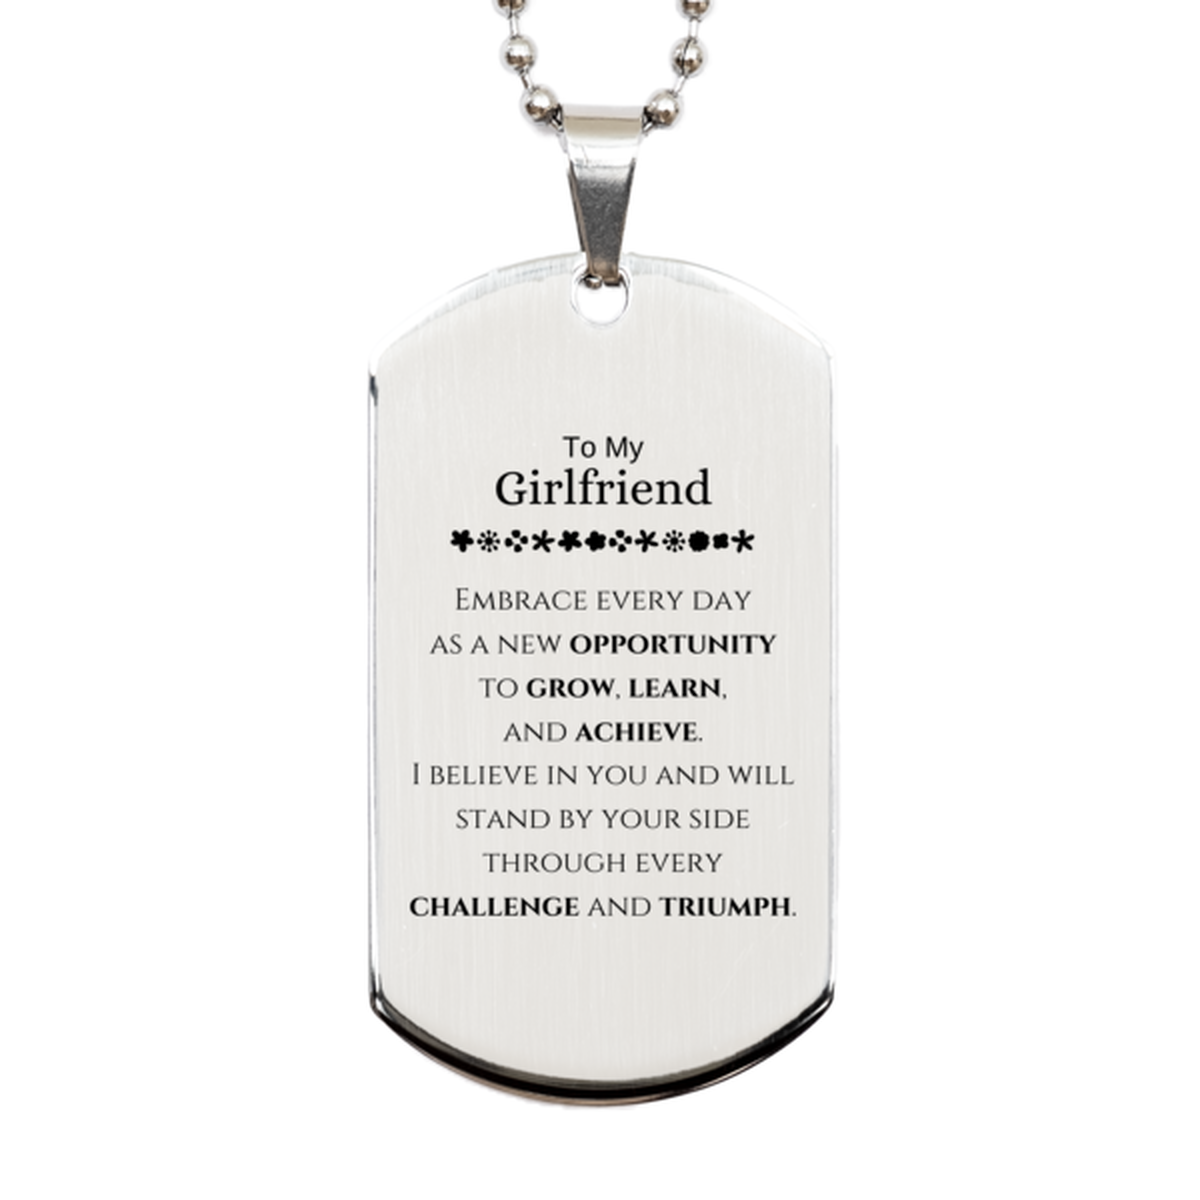 To My Girlfriend Gifts, I believe in you and will stand by your side, Inspirational Silver Dog Tag For Girlfriend, Birthday Christmas Motivational Girlfriend Gifts